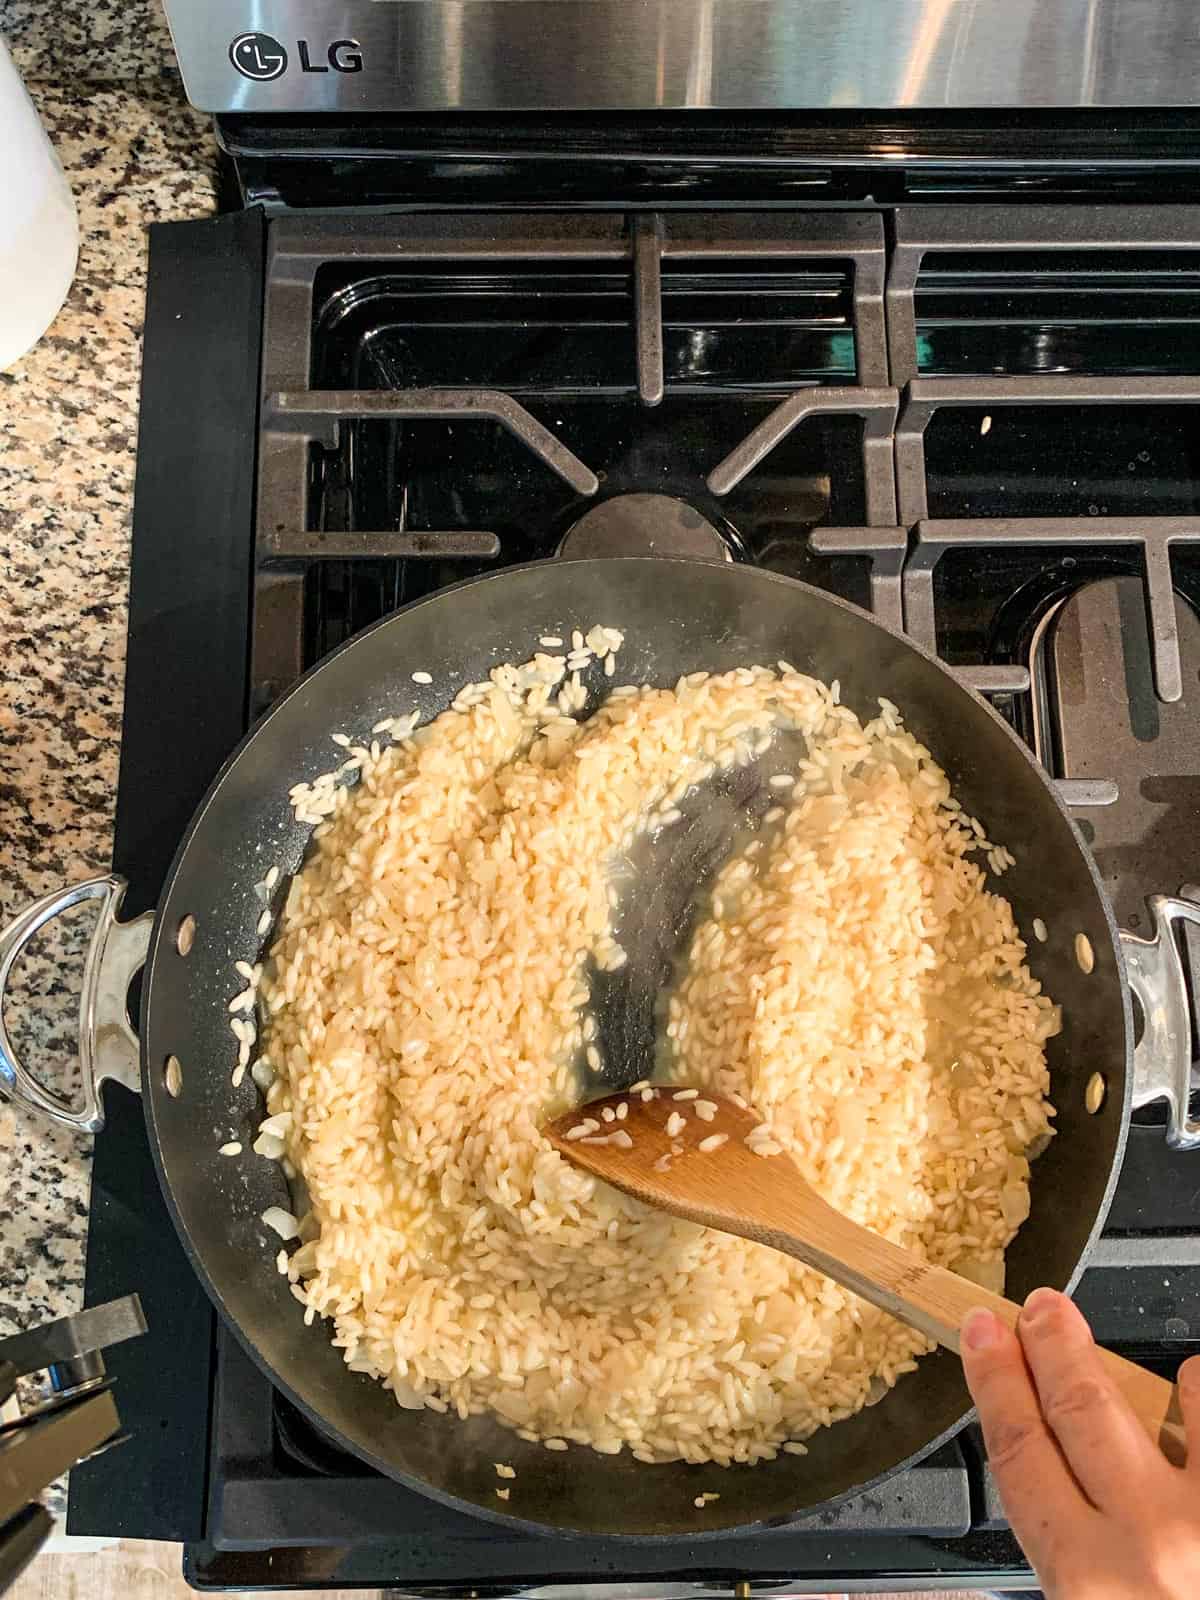 Wooden spoon streaking through a skillet of simmering arborio rice.